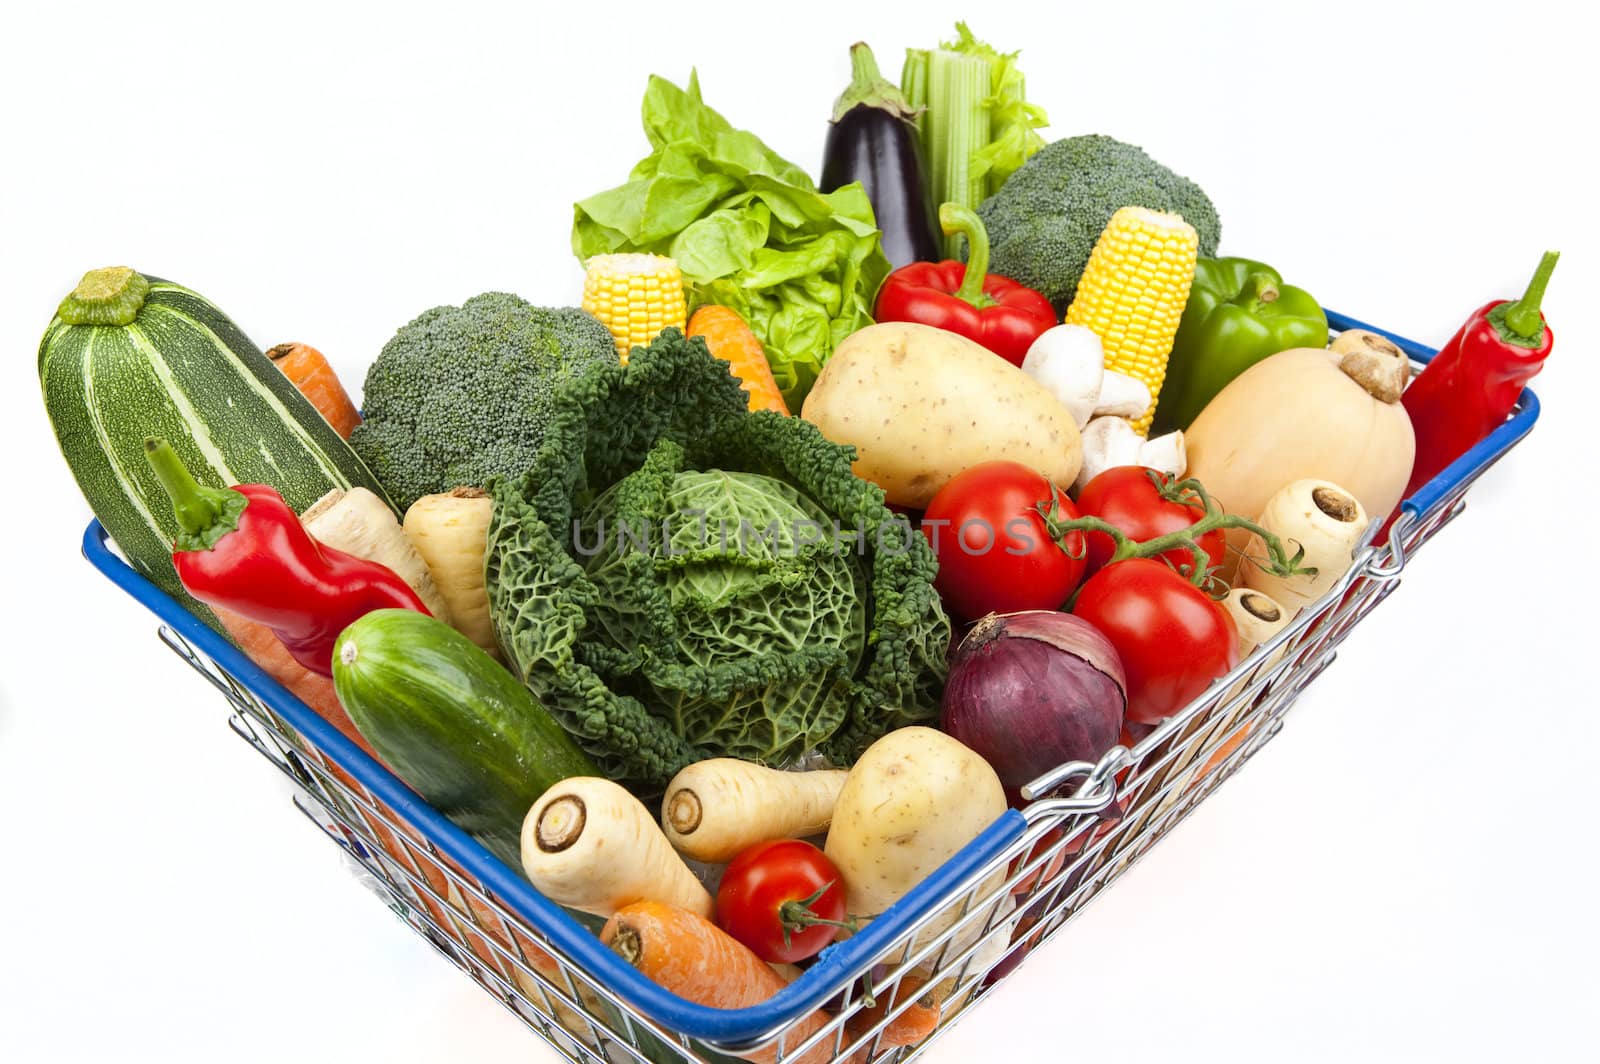 A shopping basket full of Vegetables on a white background.